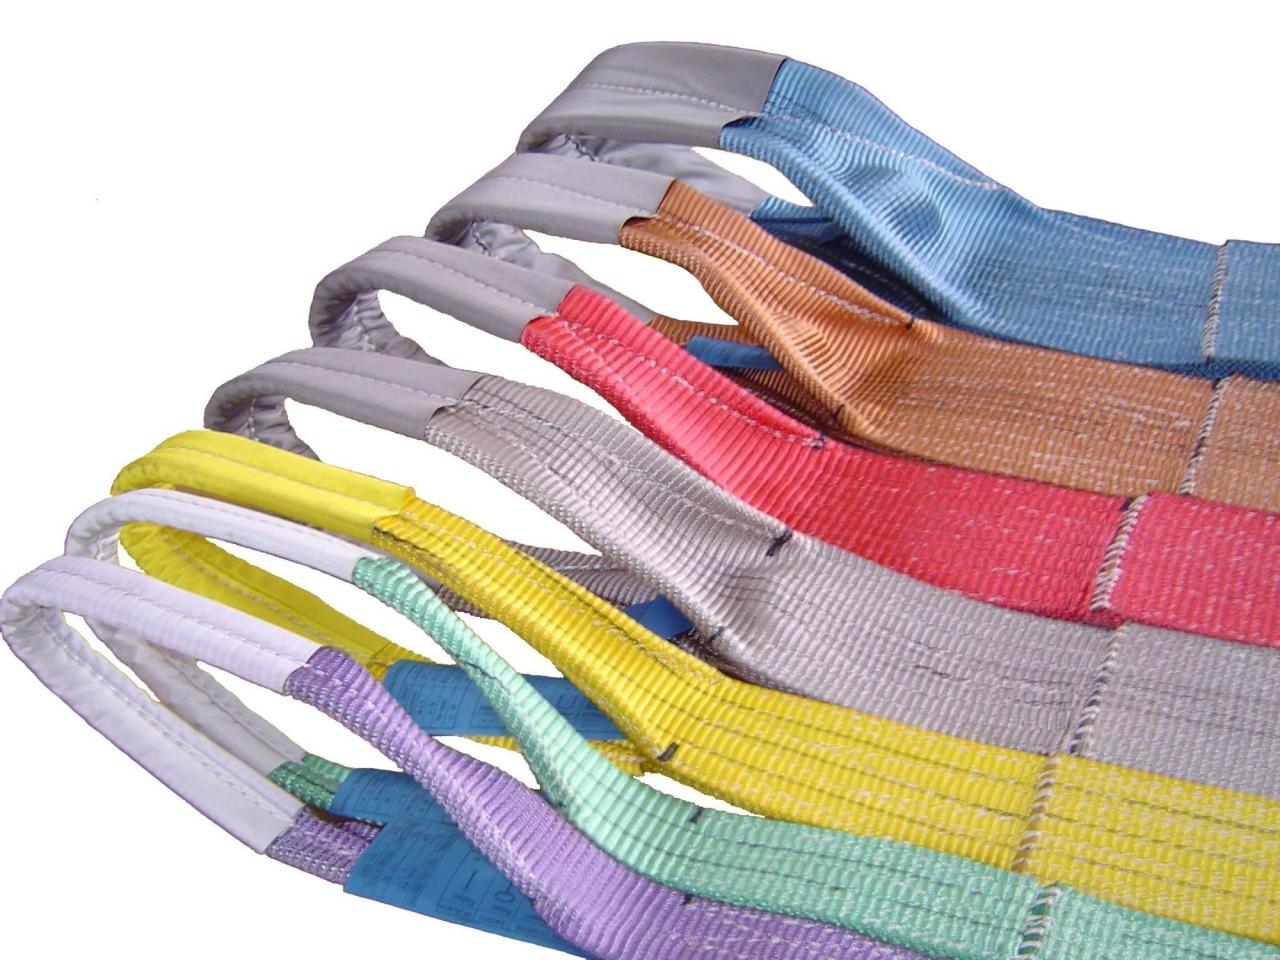 how many types of slings are there?Here introduces 3 types